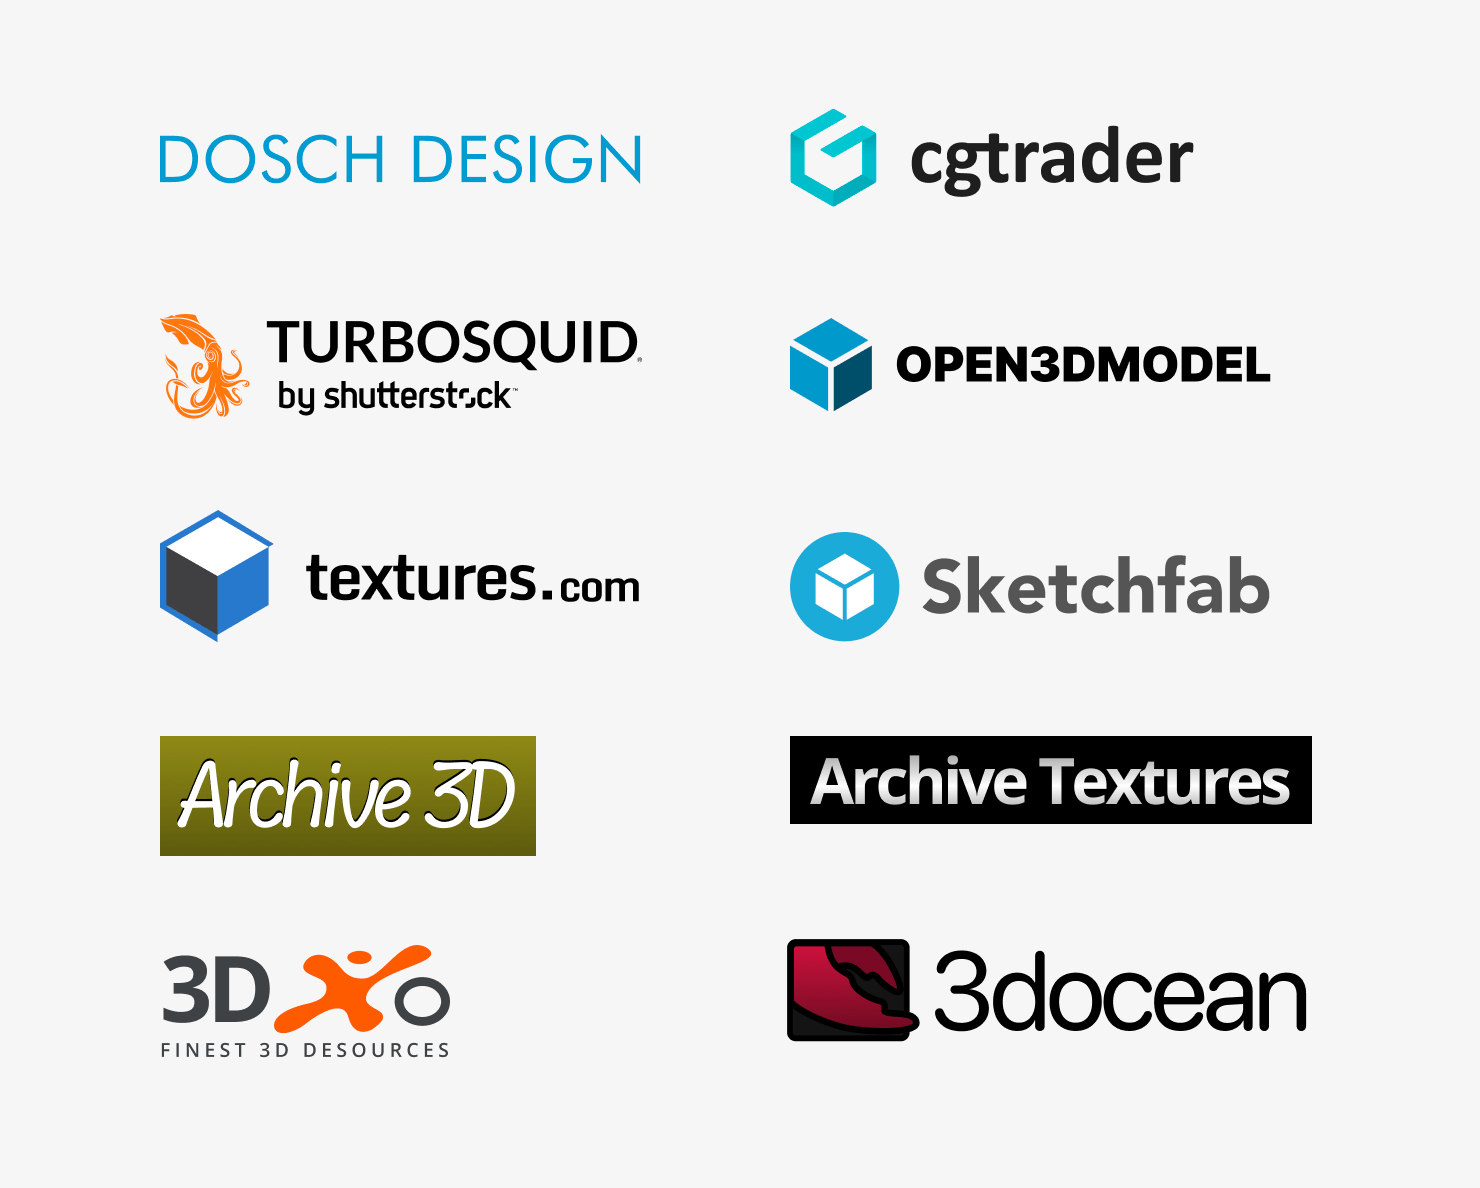 A list of websites offering free 3D models and textures.